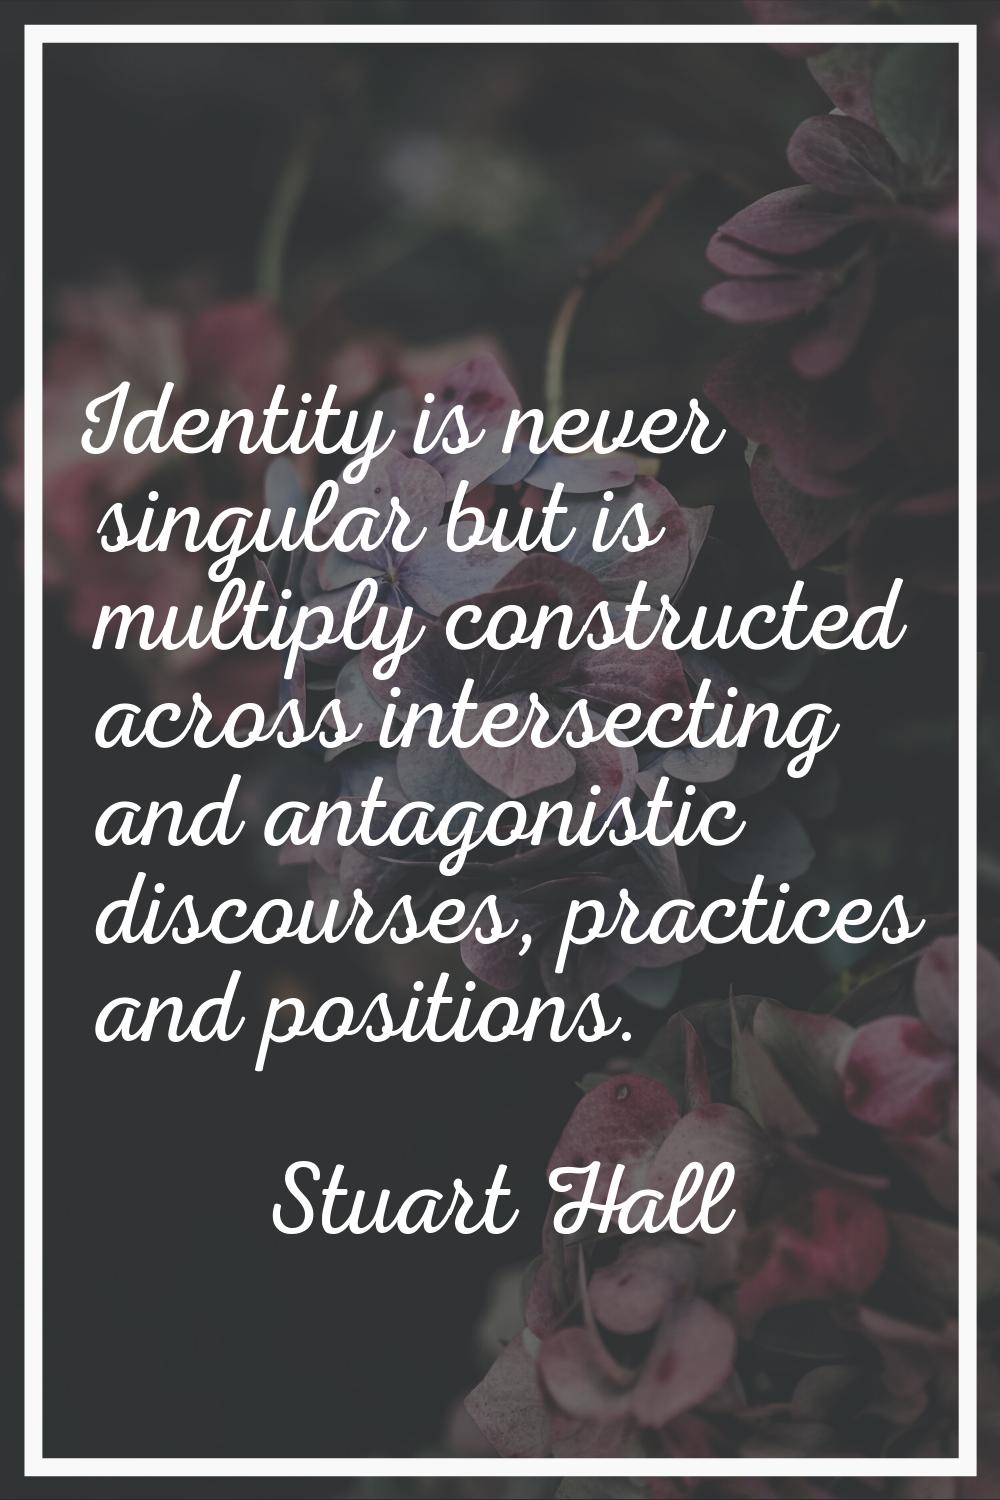 Identity is never singular but is multiply constructed across intersecting and antagonistic discour